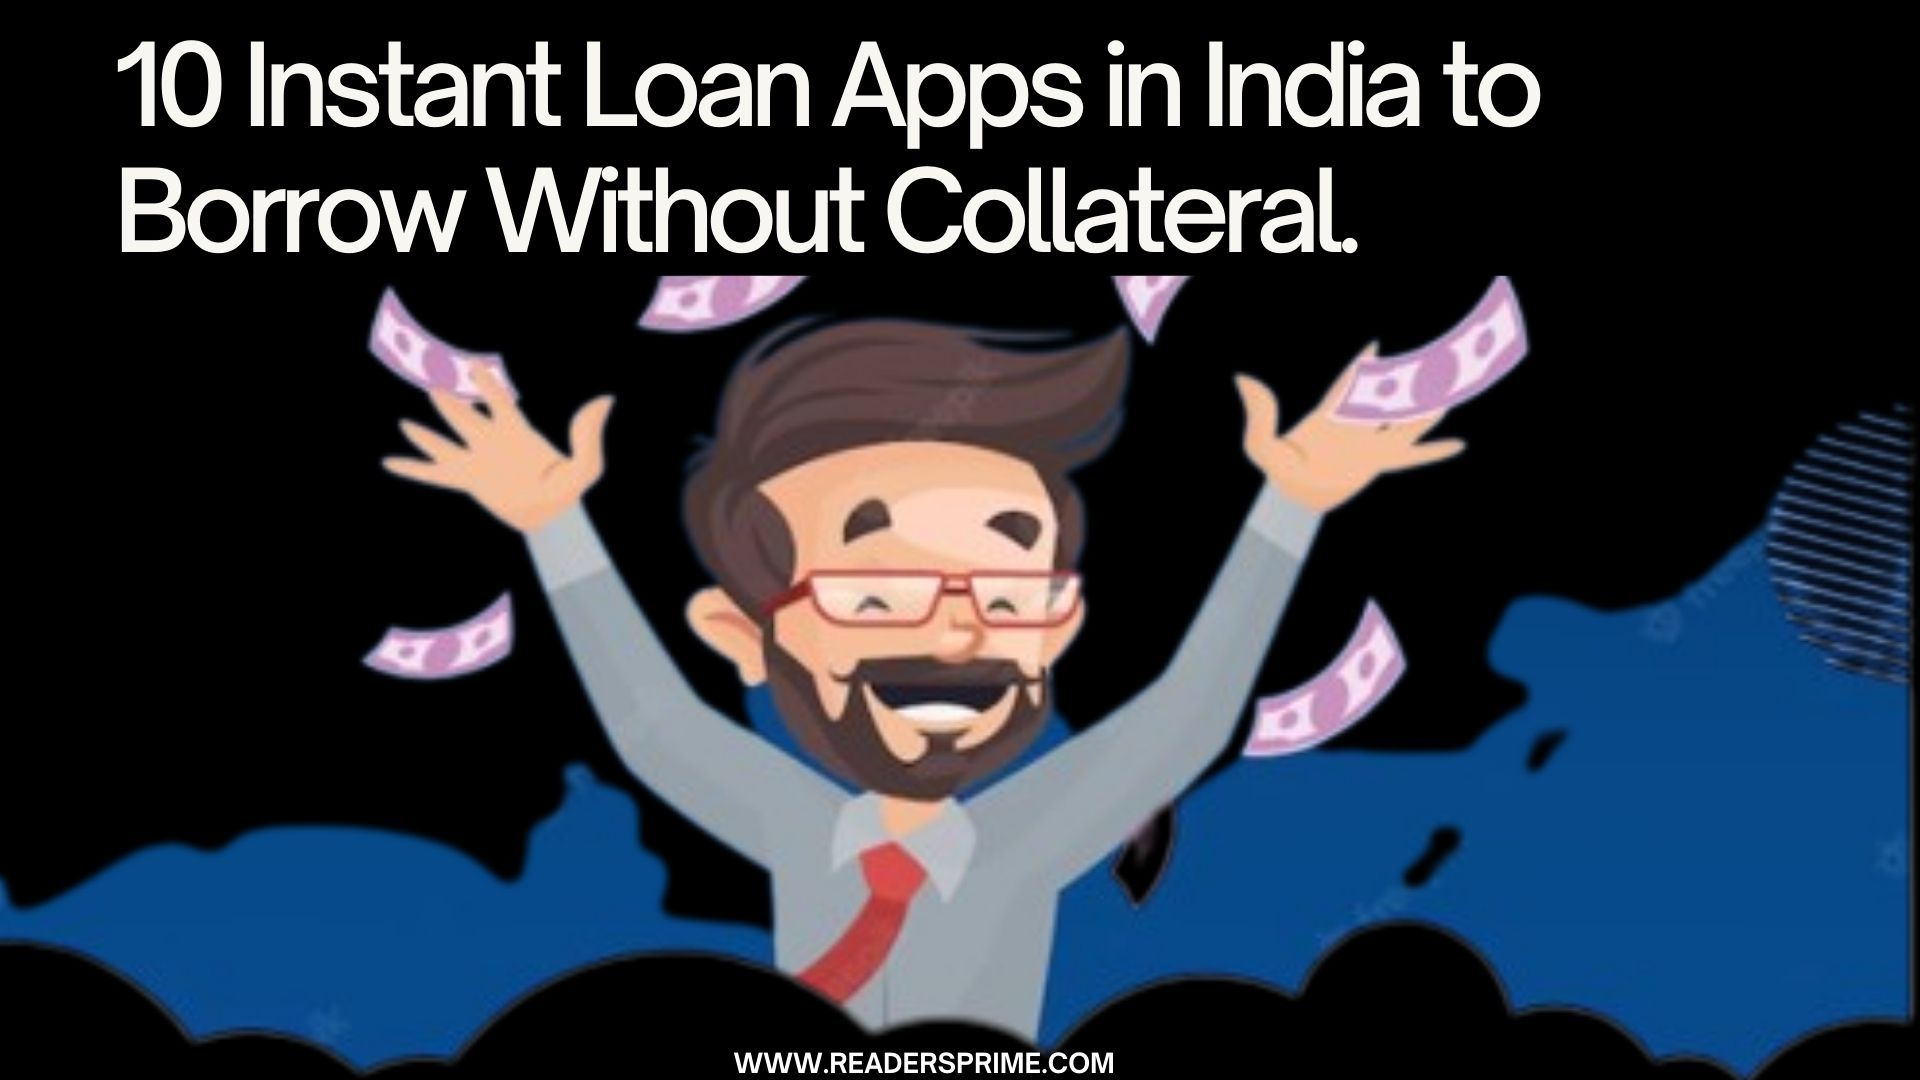 10 Instant Loan Apps in India to Borrow Without Collateral